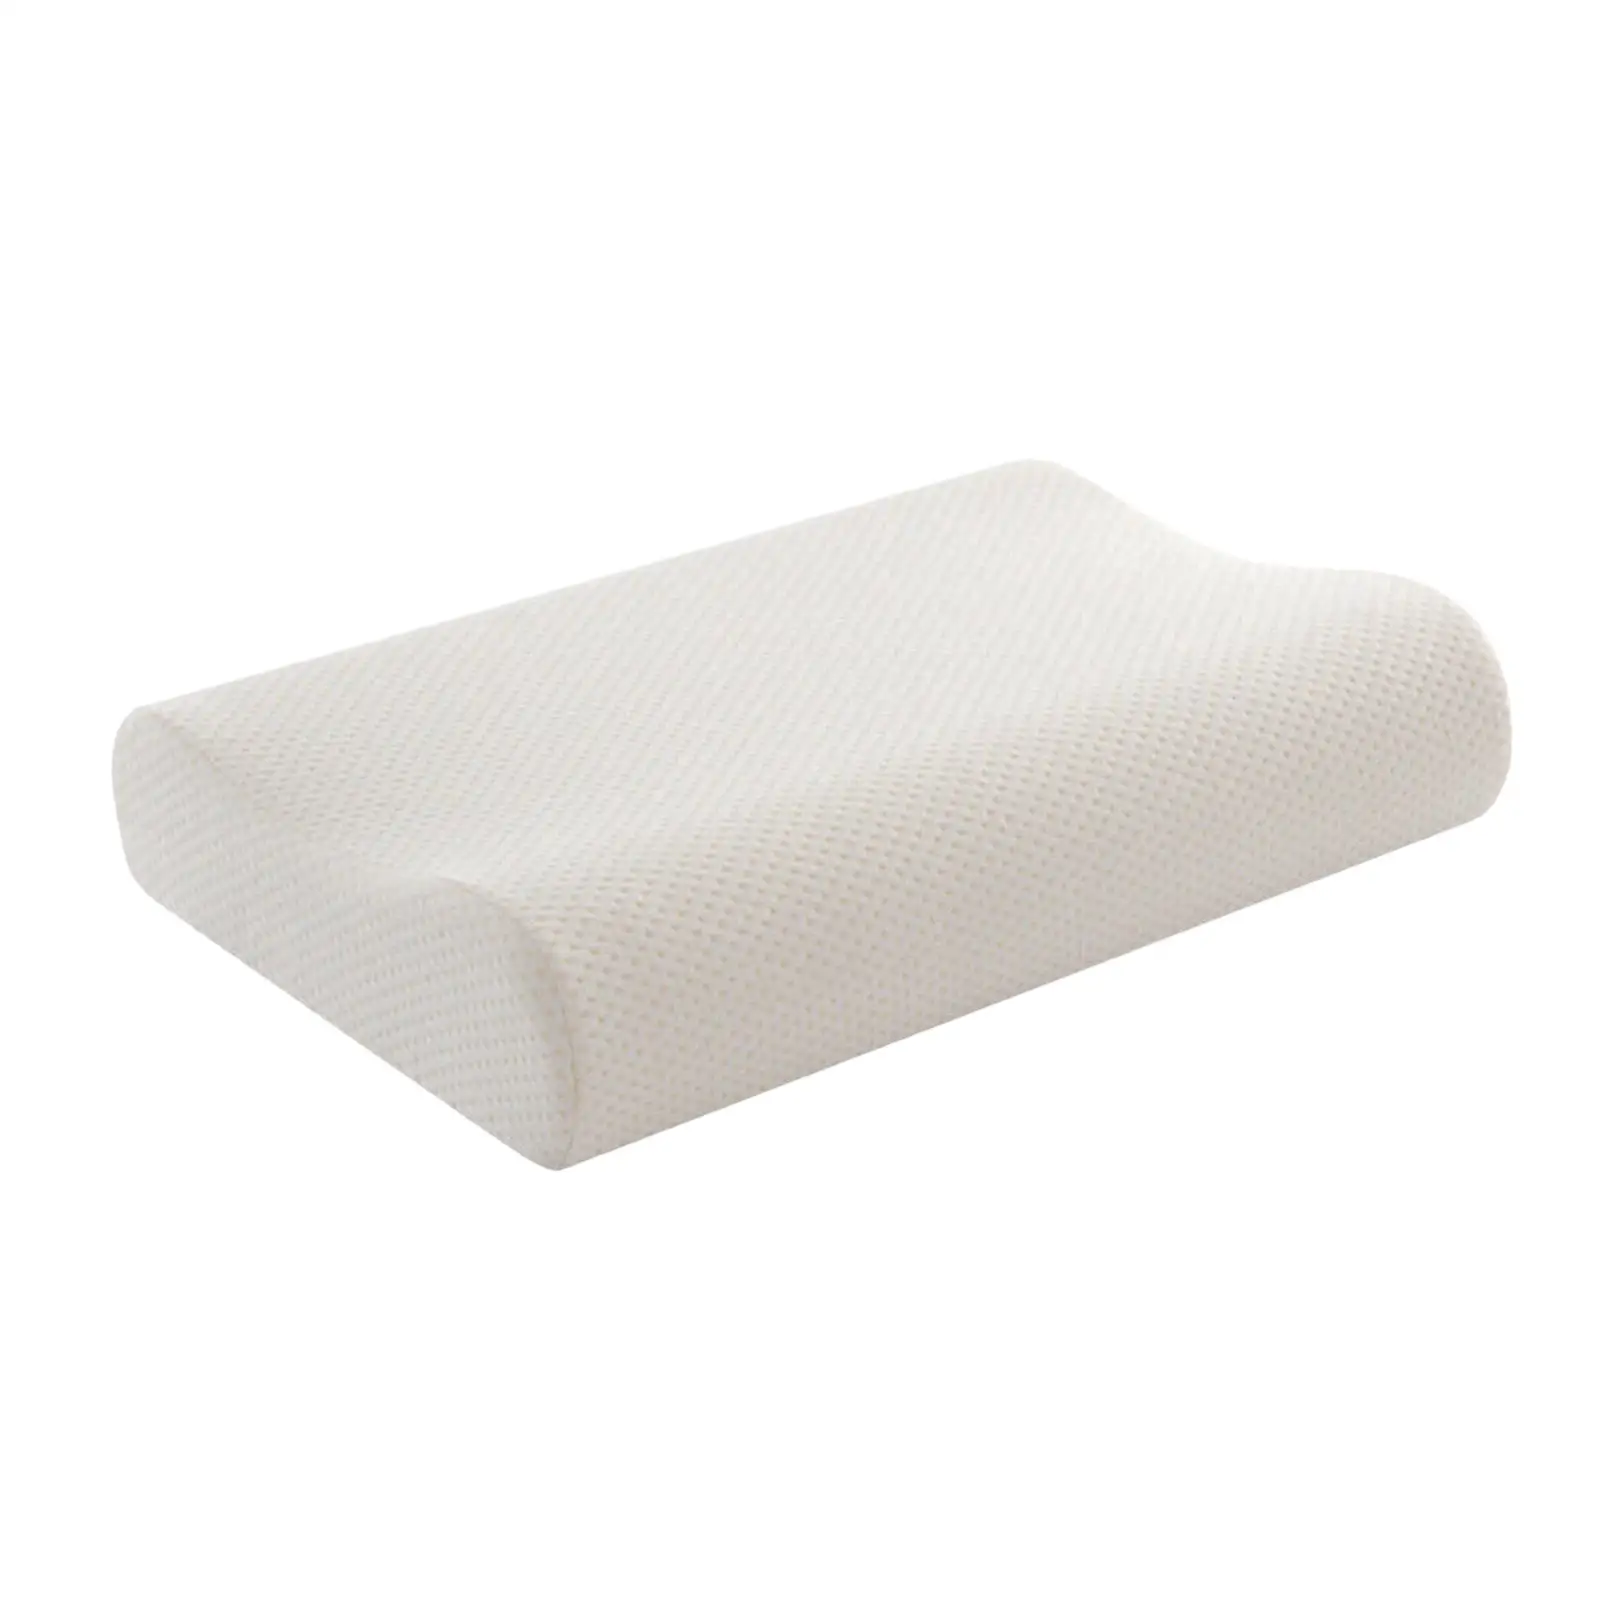 Luxury Bamboo Pillow with Anti Bacterial Hard Memory Foam Fabric Pillow